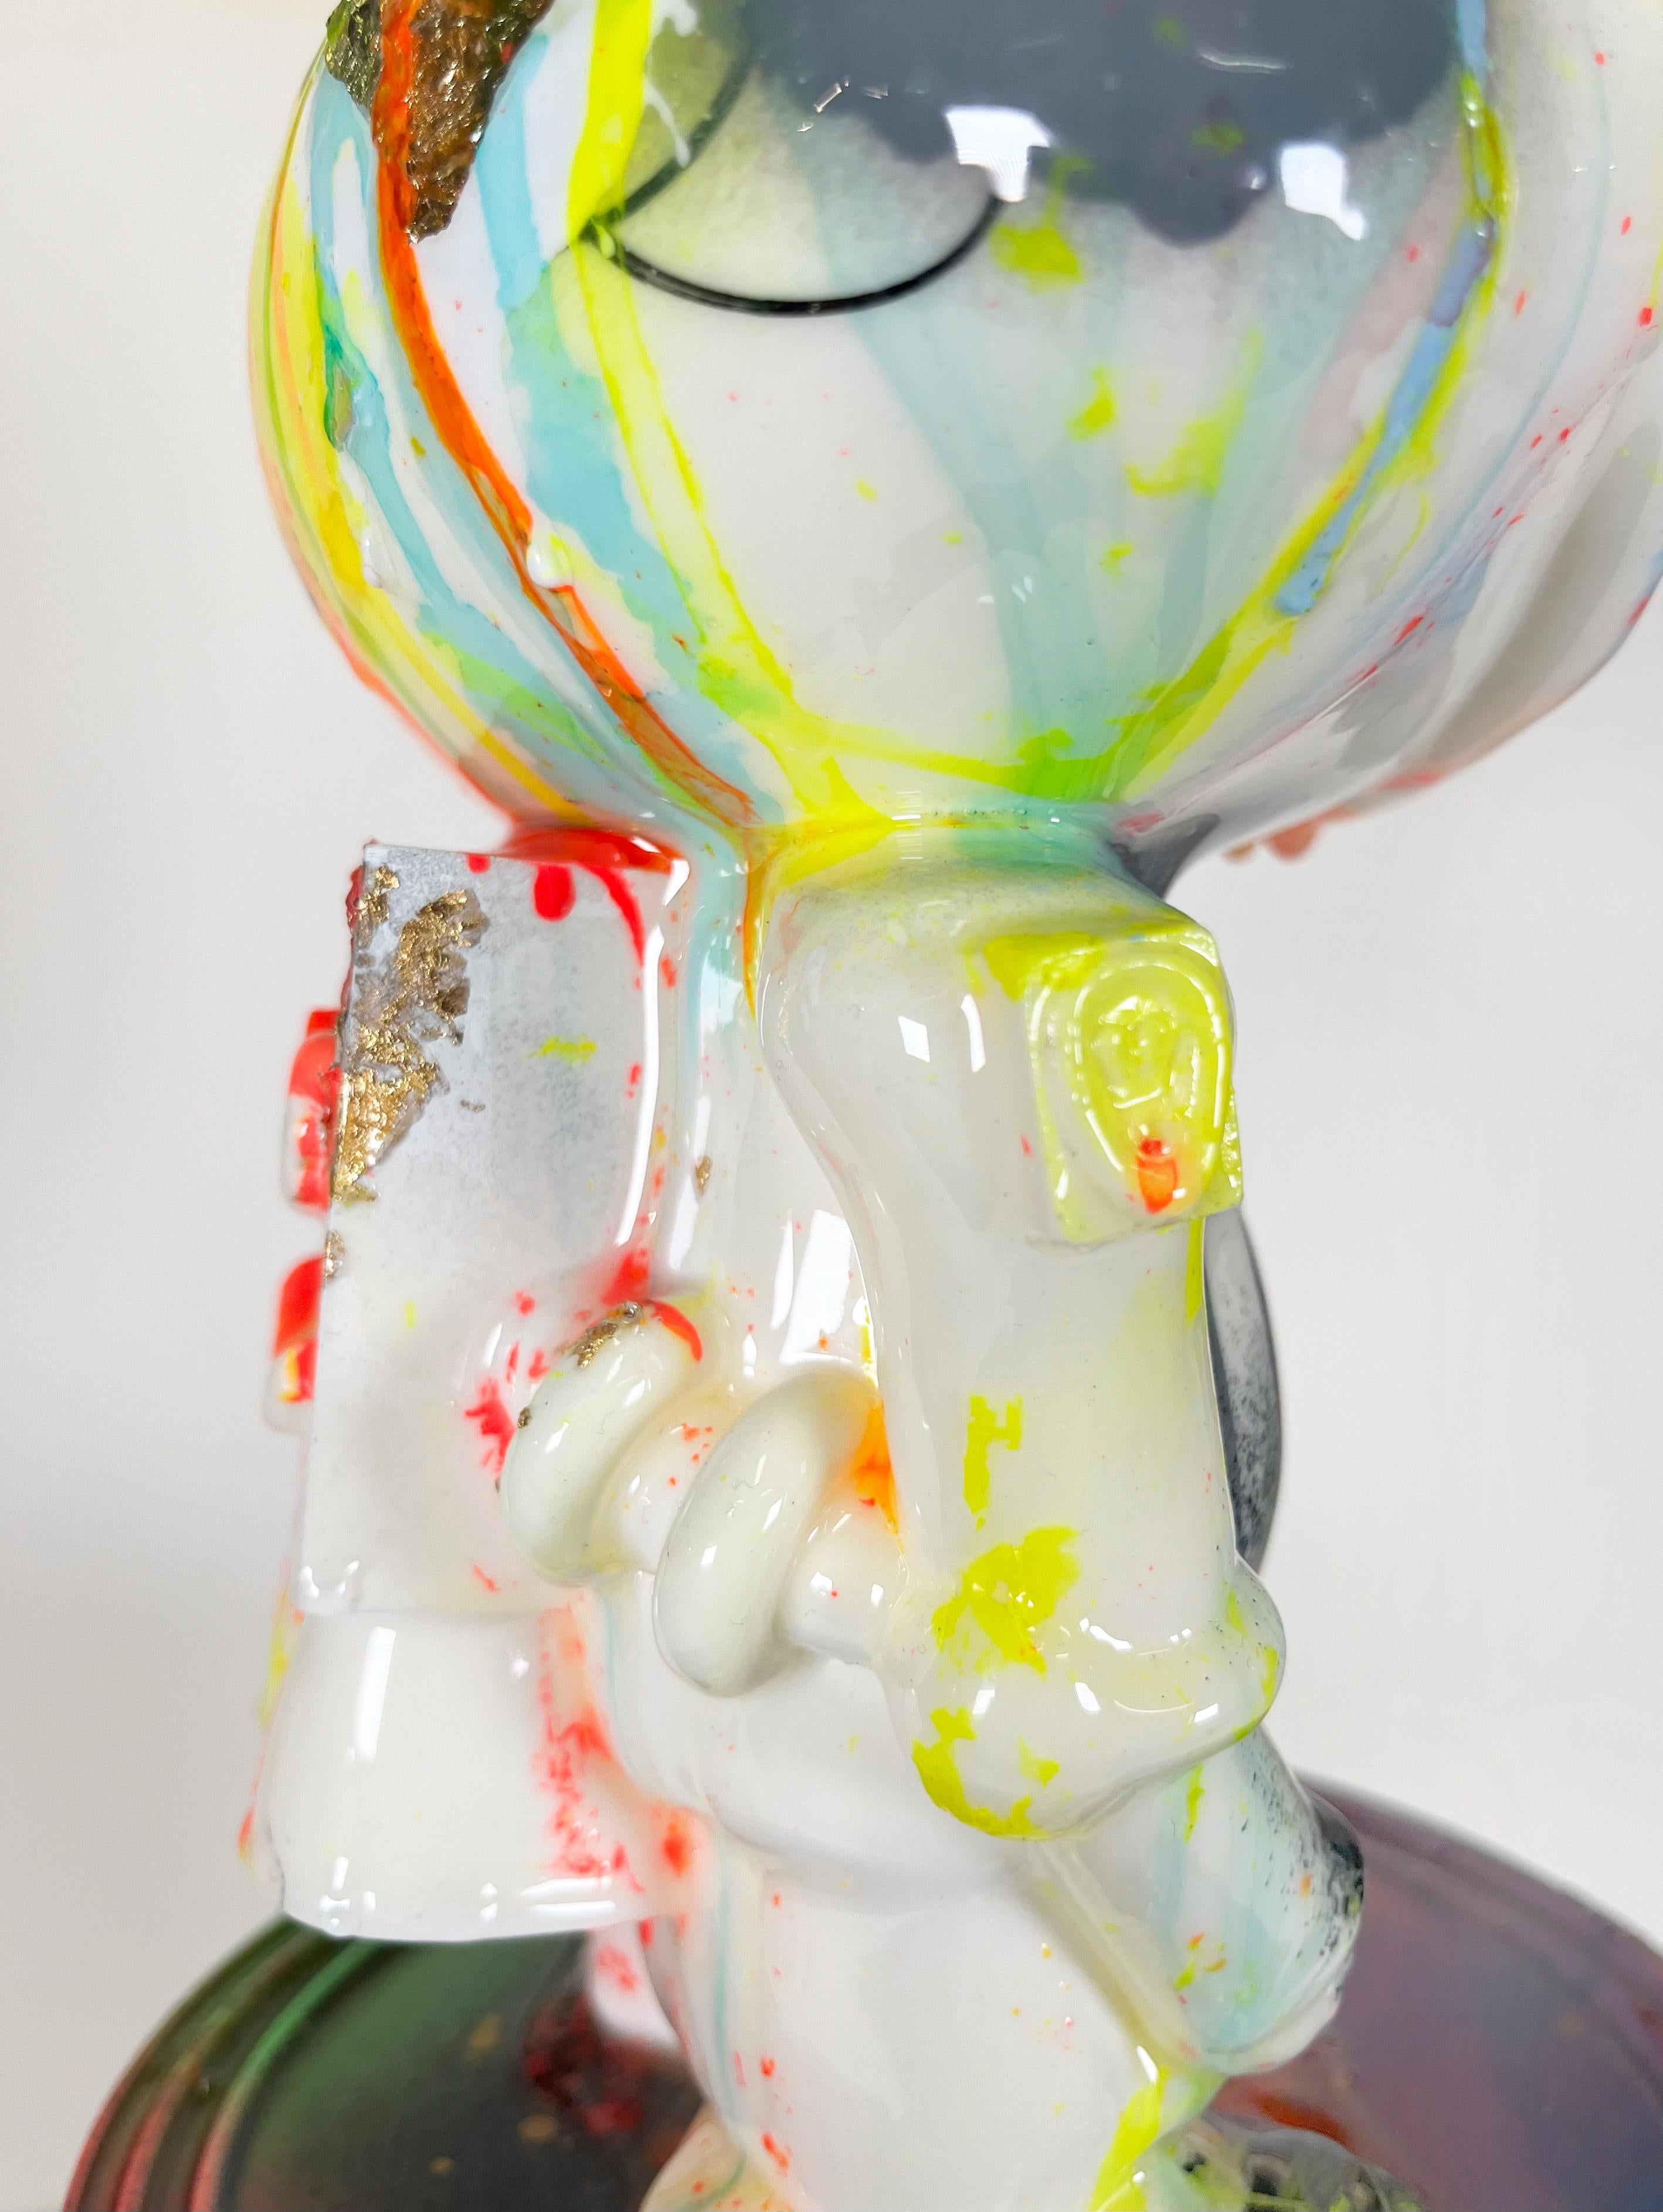 Technicolour Xeno Paint Can v2, colorful and cool resin cast figure sculpture For Sale 1